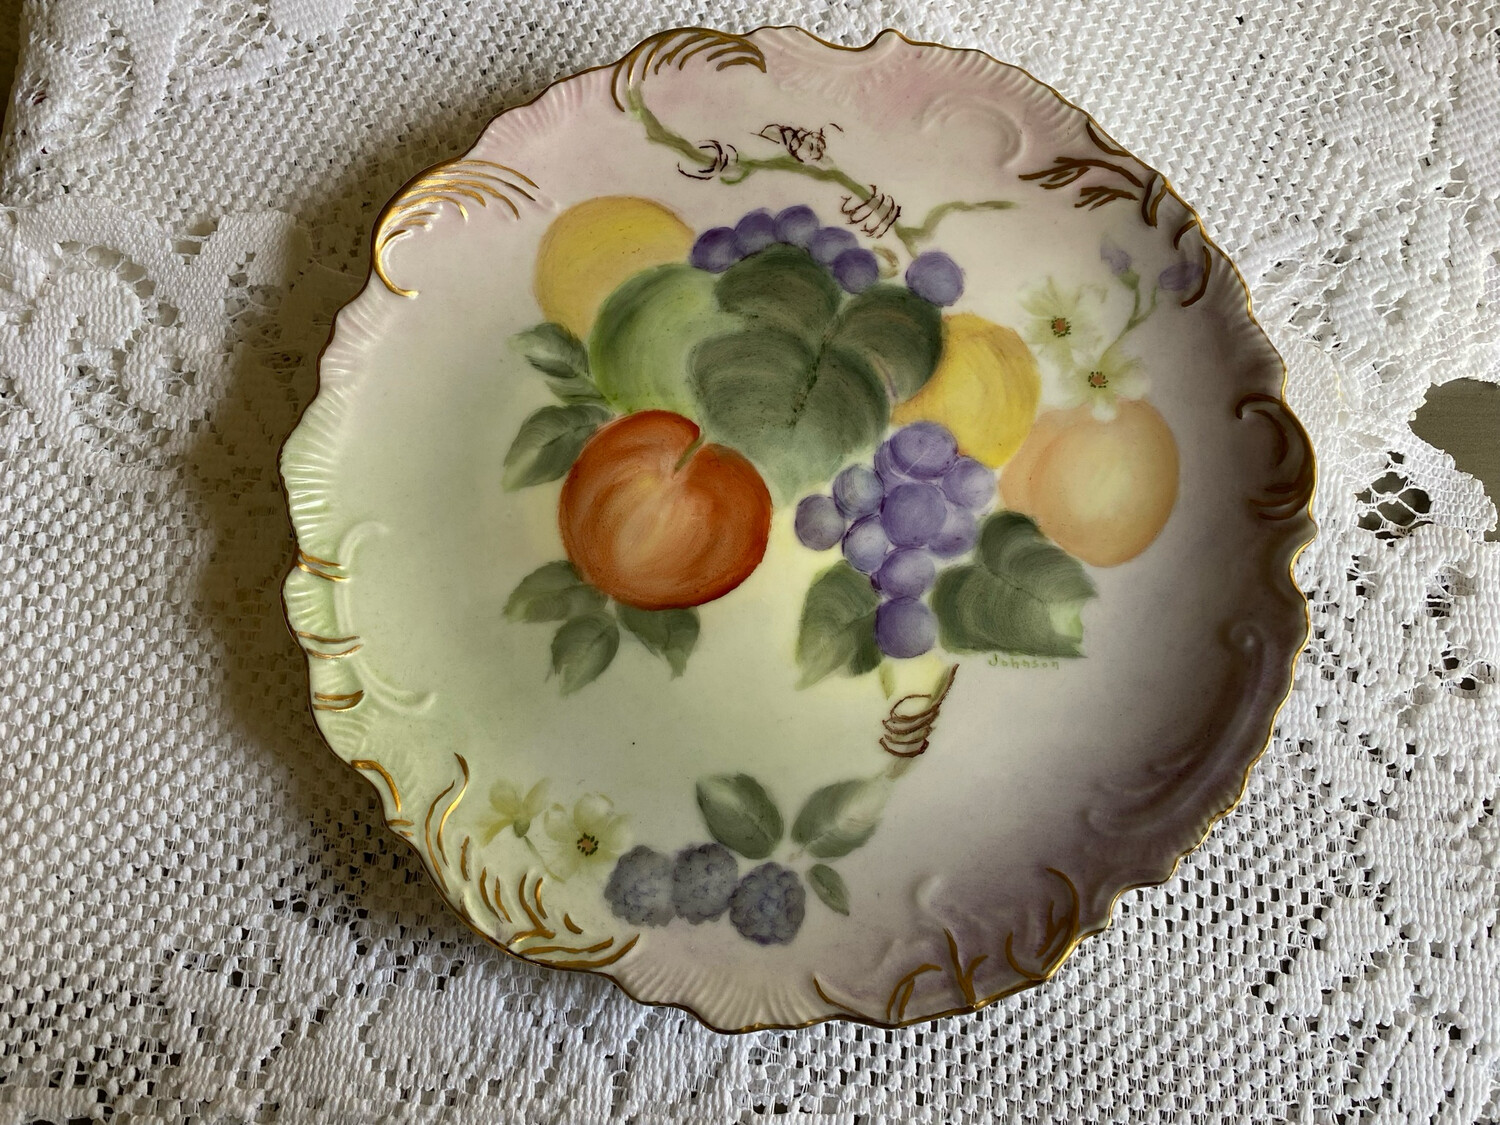 Hand Painted Fruit Plate, Decorative Plate for Display in Kitchen